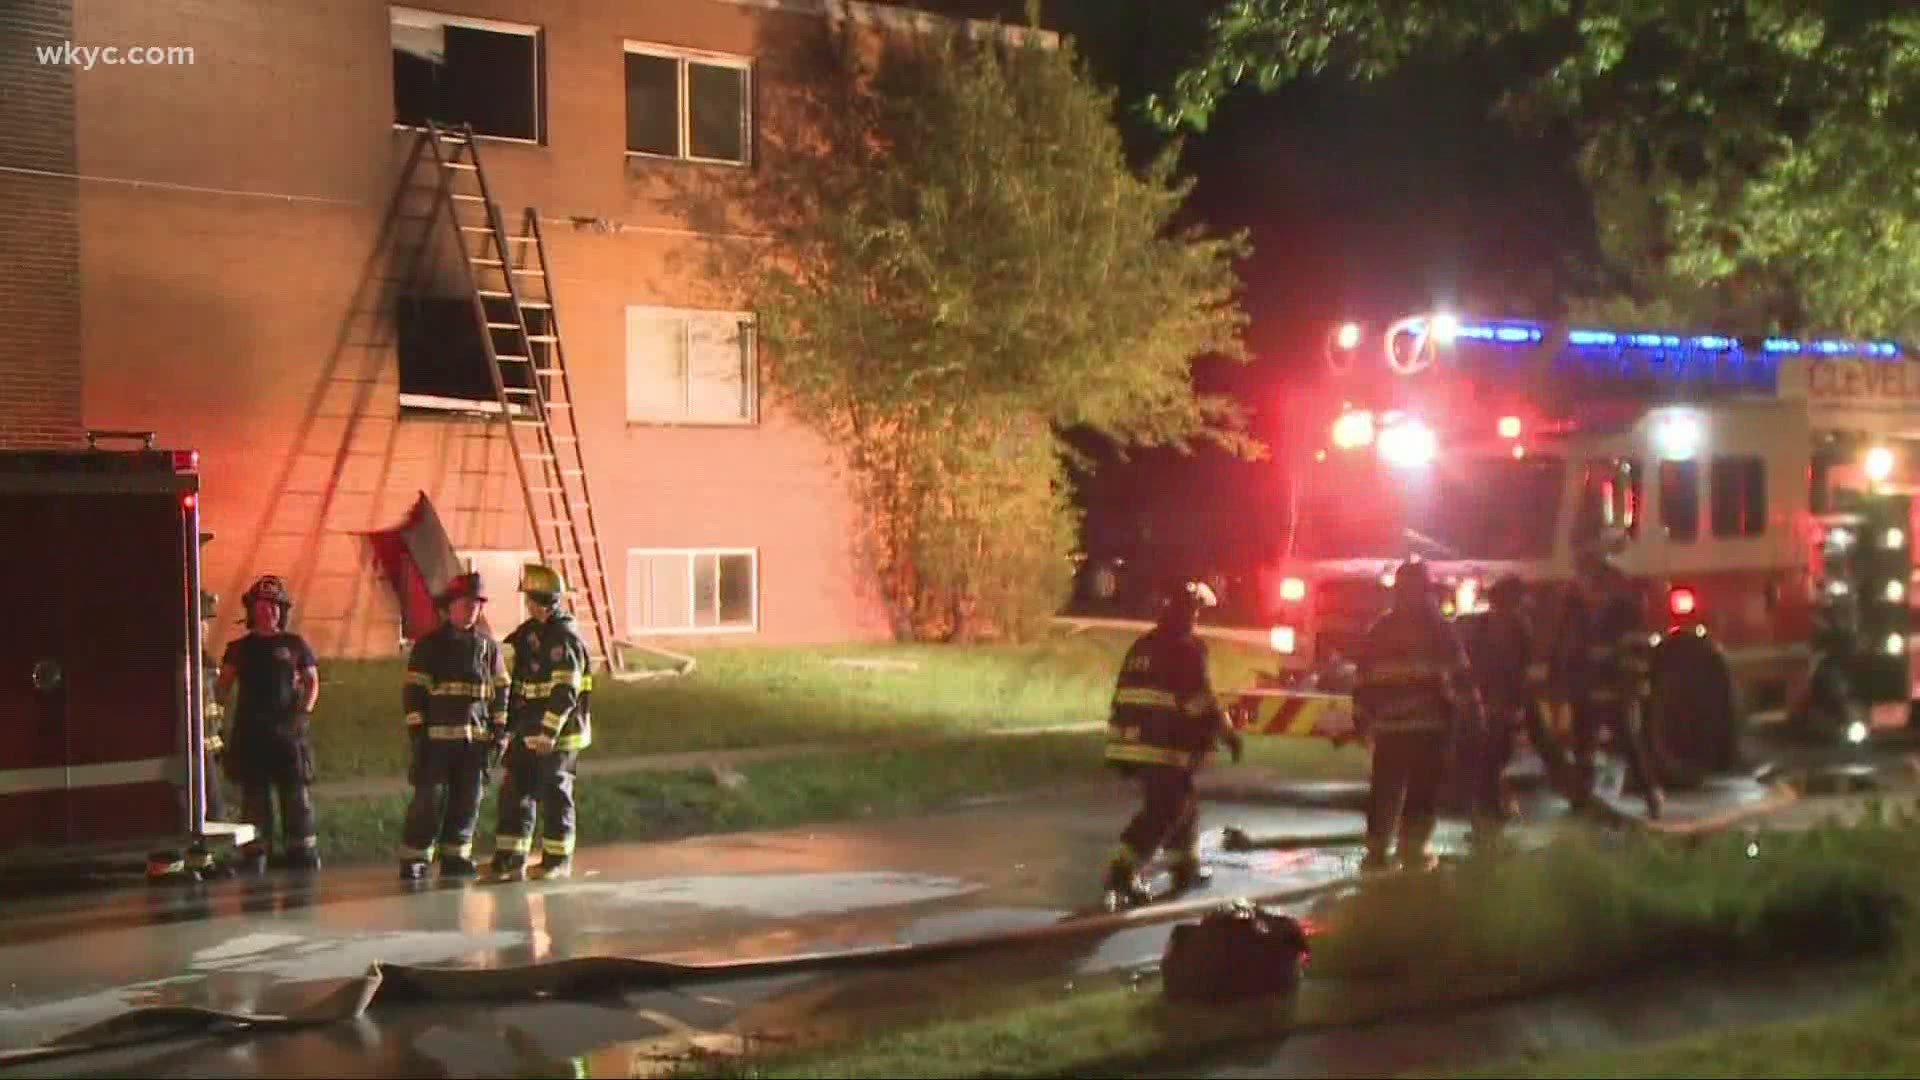 June 11, 2020: The flames began around 3:30 a.m. at the Allen House apartments on E. 143rd Street.